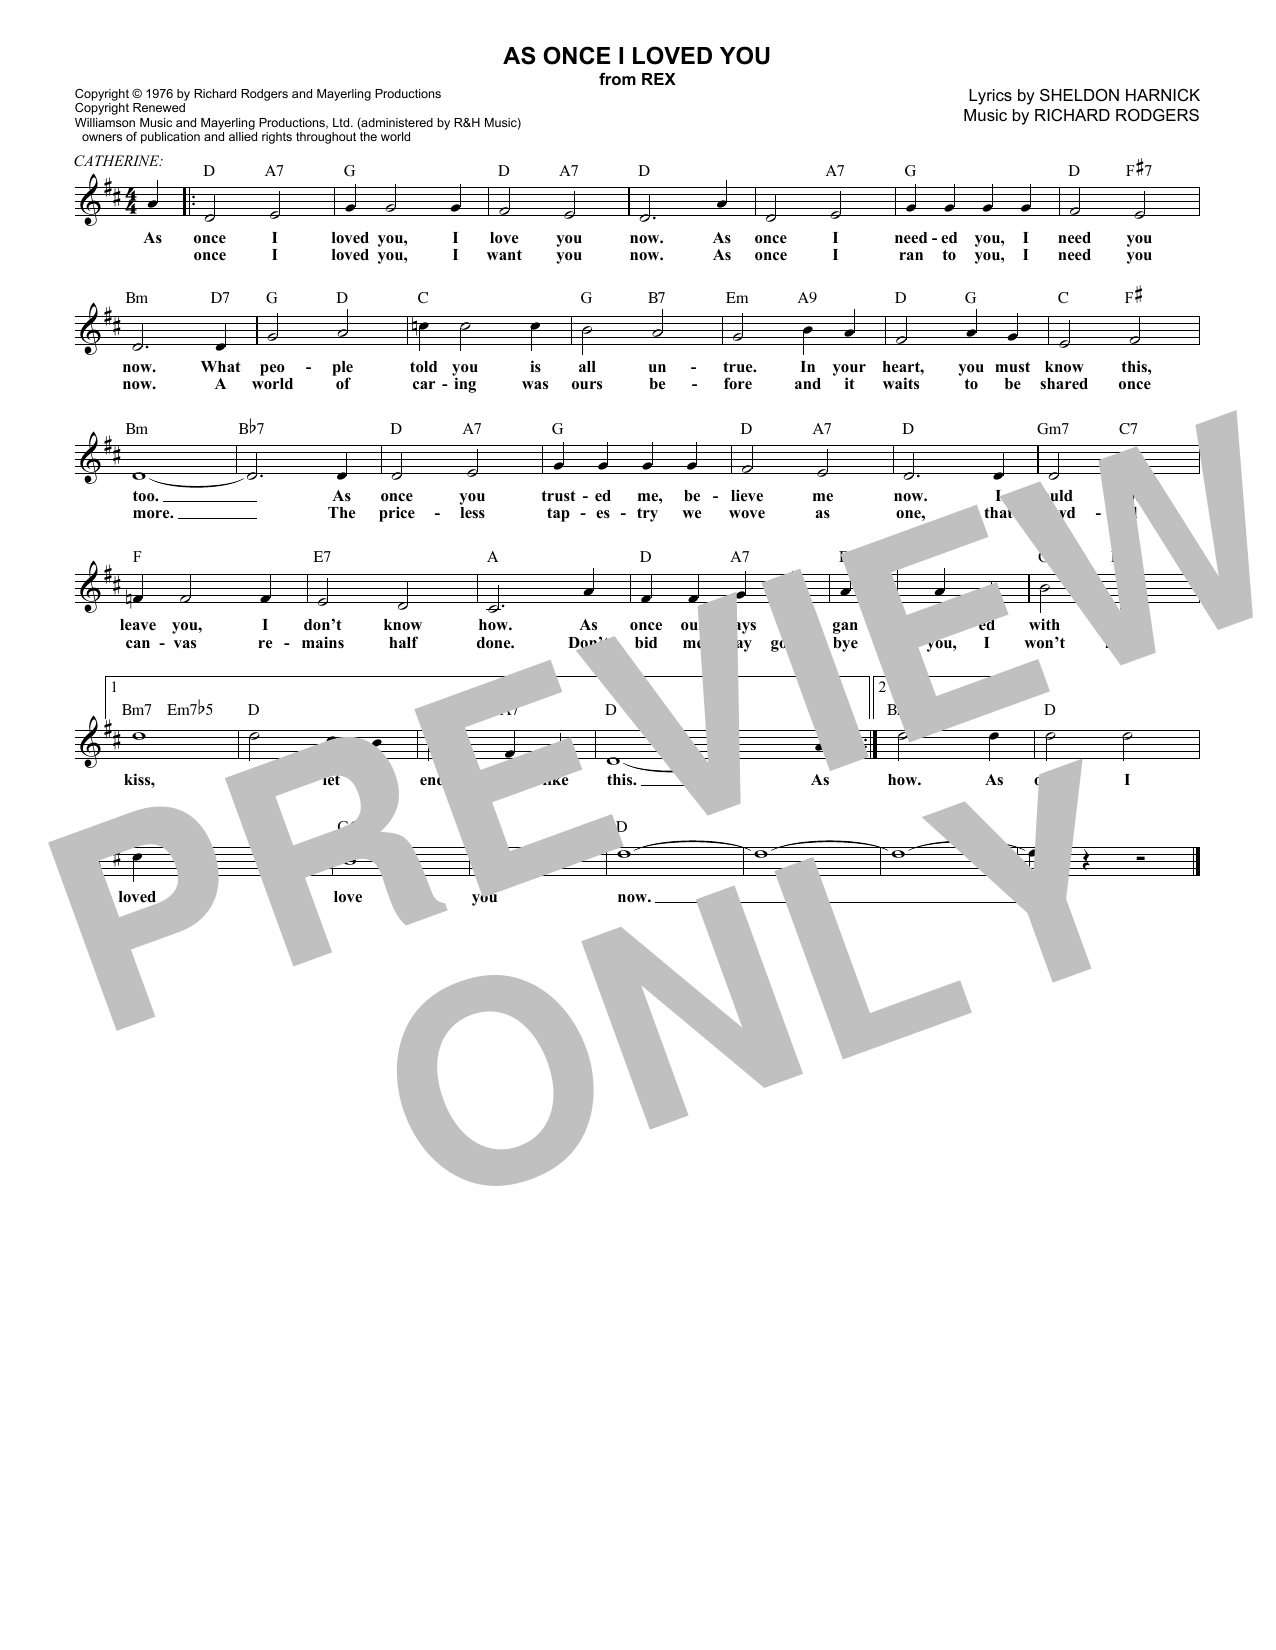 Download Richard Rodgers As Once I Loved You Sheet Music